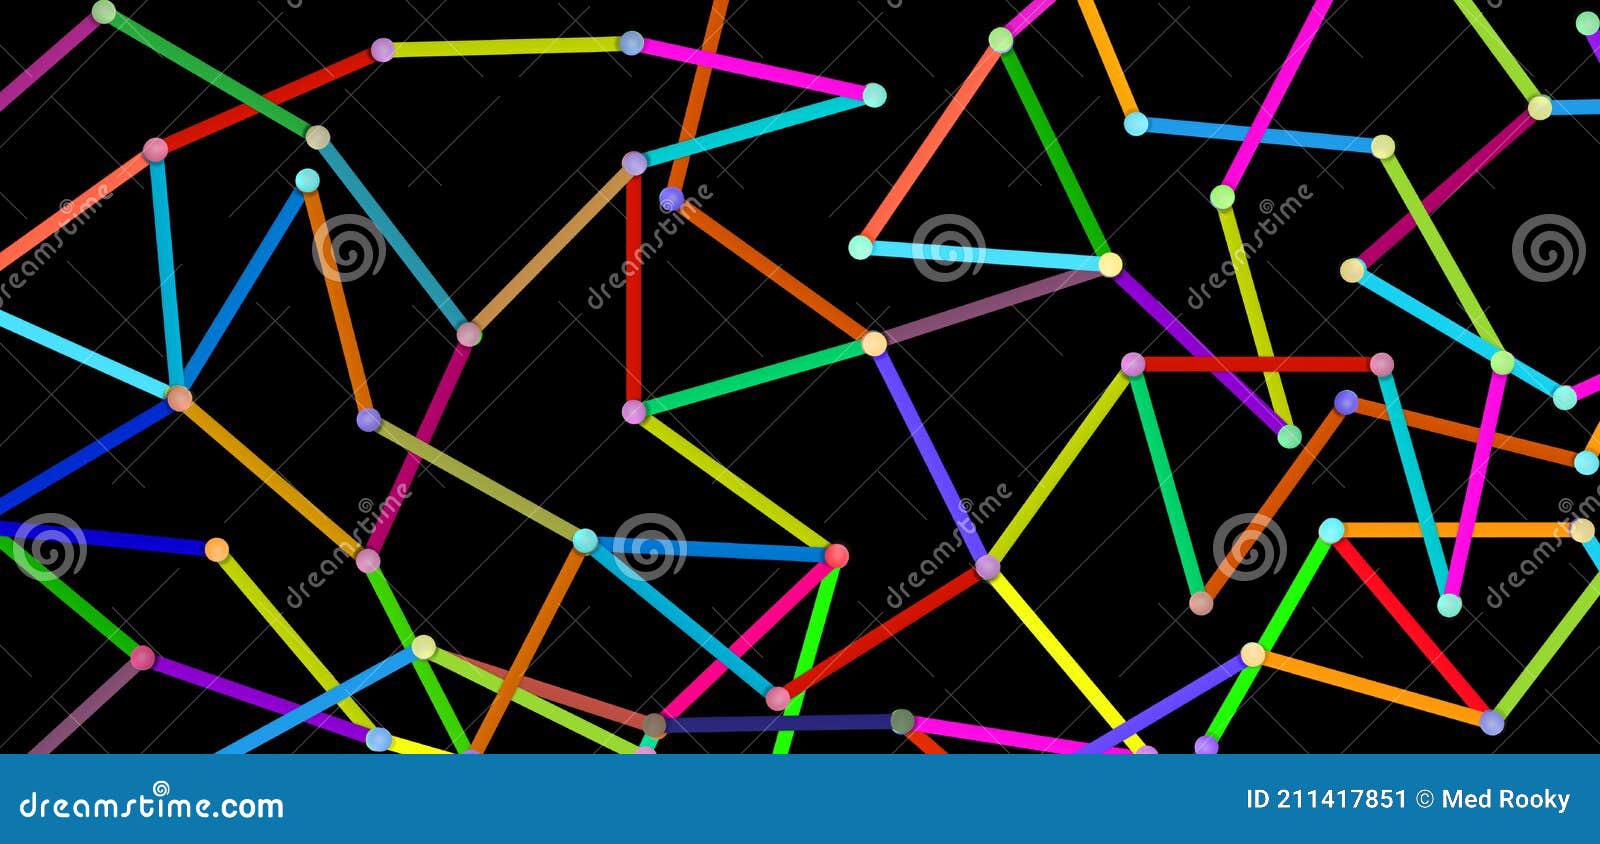 global connection and in network communication concept. illustrated by multicolored lines with pin in dark grey background.